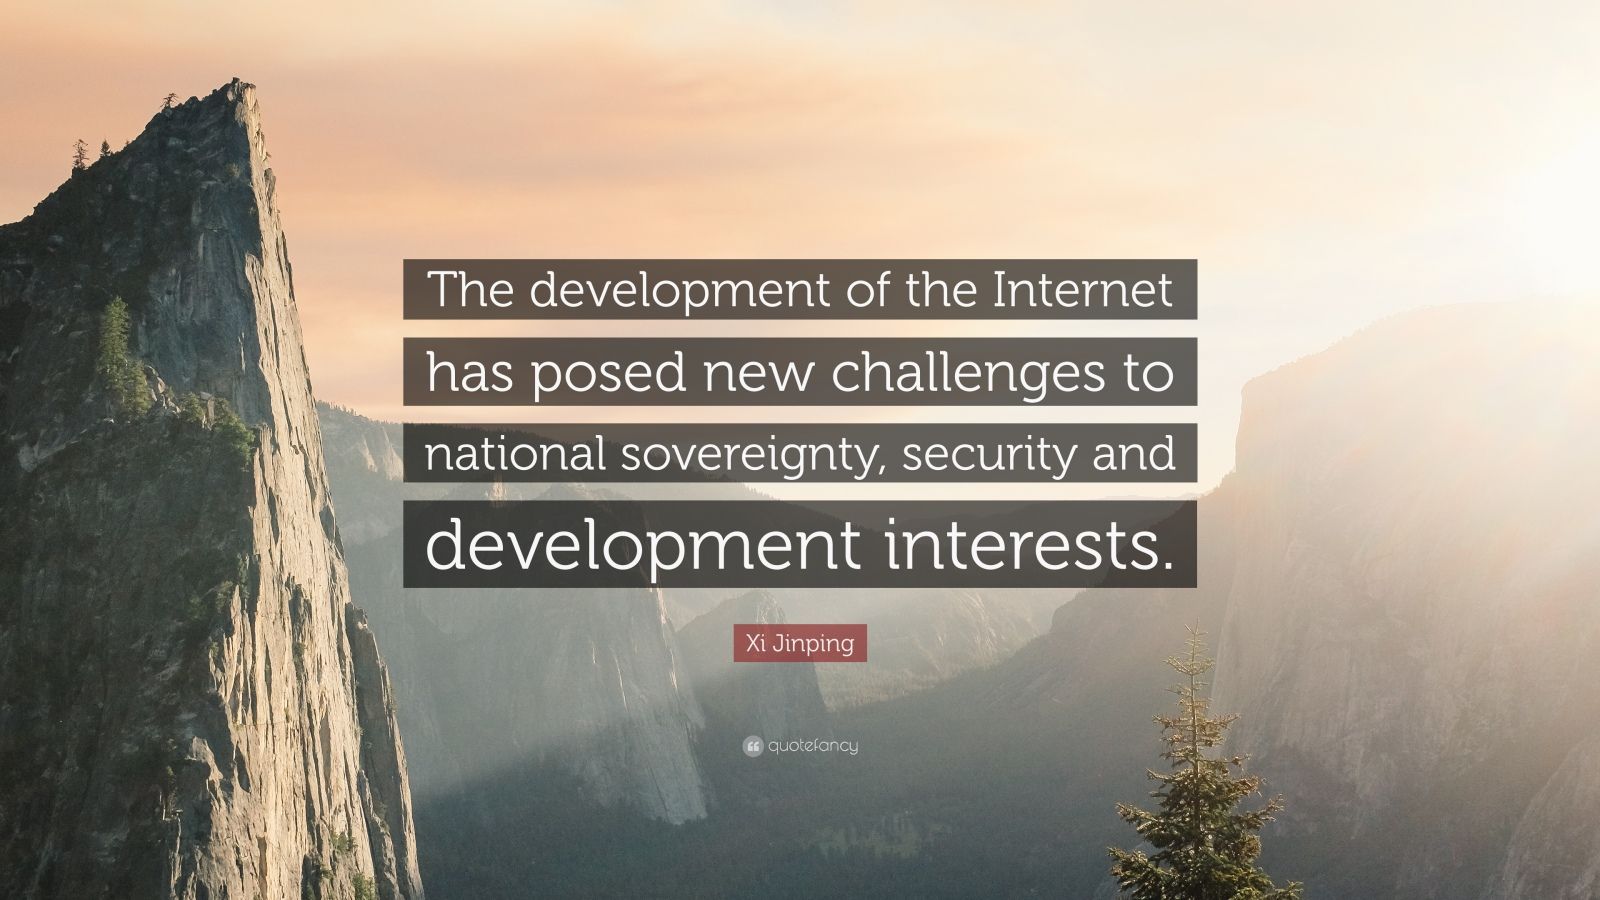 Xi Jinping Quotes (16 wallpapers) - Quotefancy